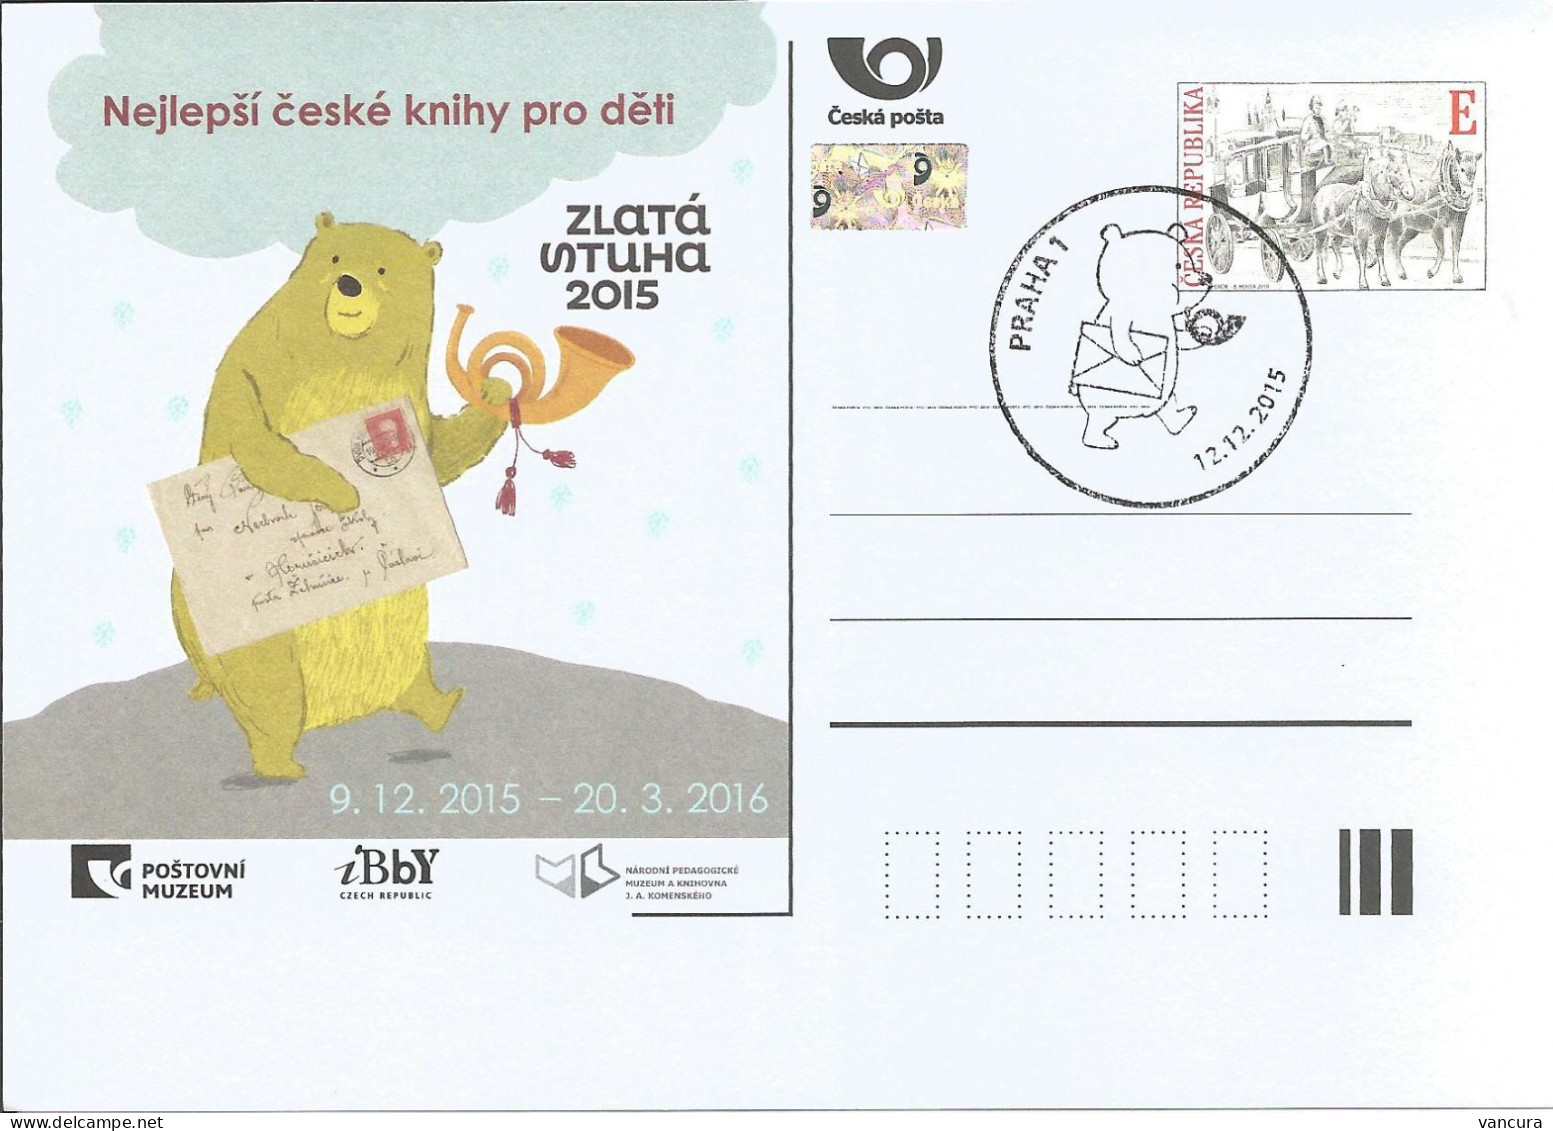 CDV PM 108 Czech Republic Exhibition In Post Museum - Illustrations For Children's Books 2015 Bear As A Postman - Ours